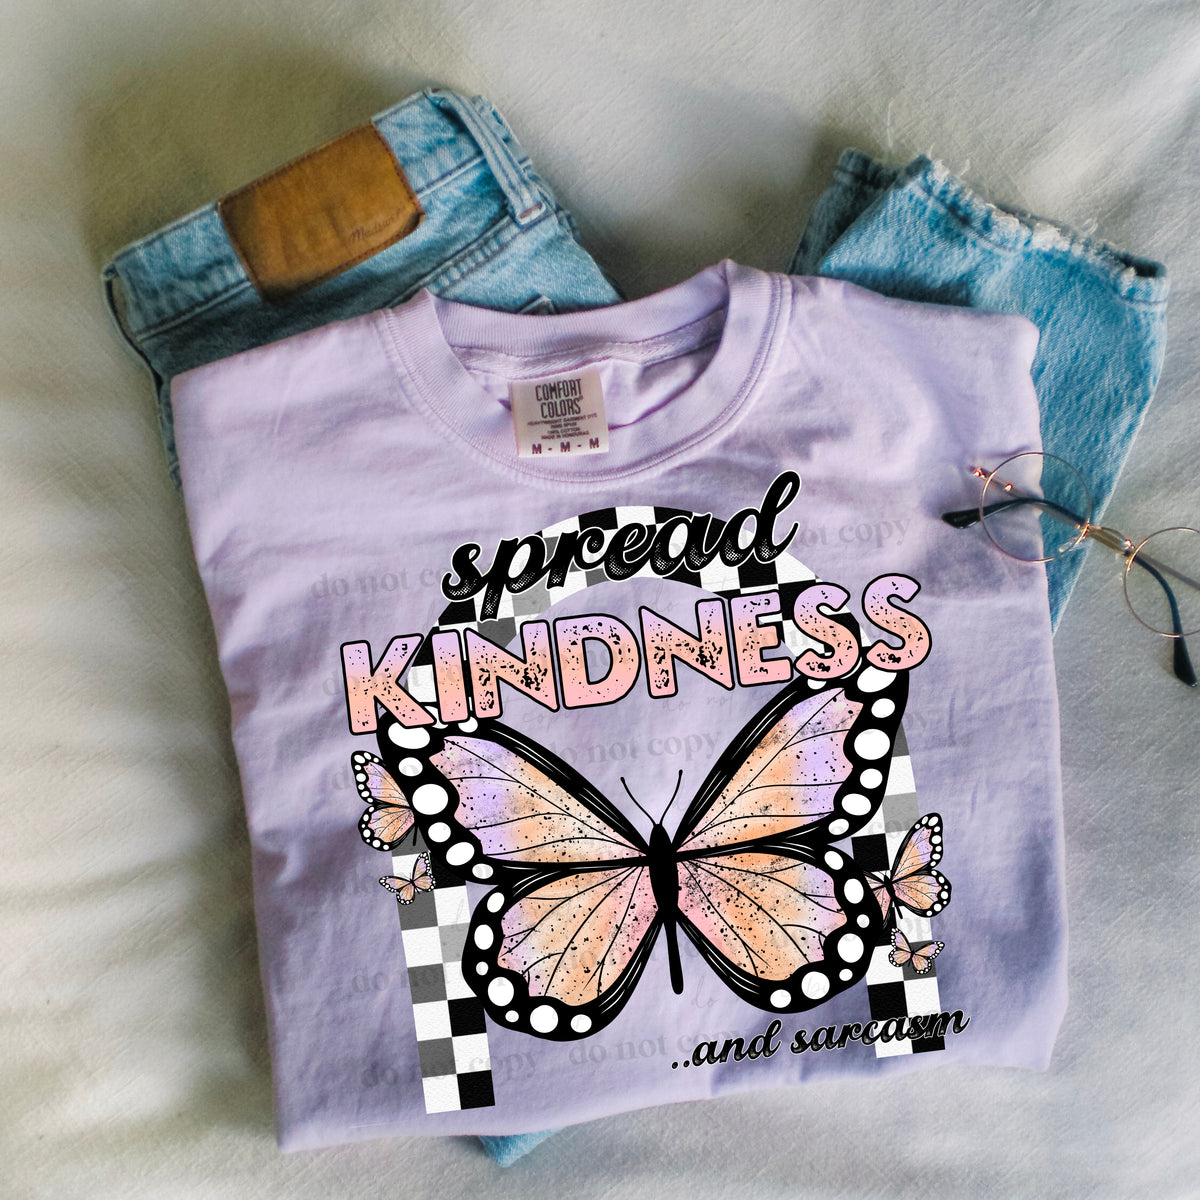 Spread kindness and sarcasm with sleeve